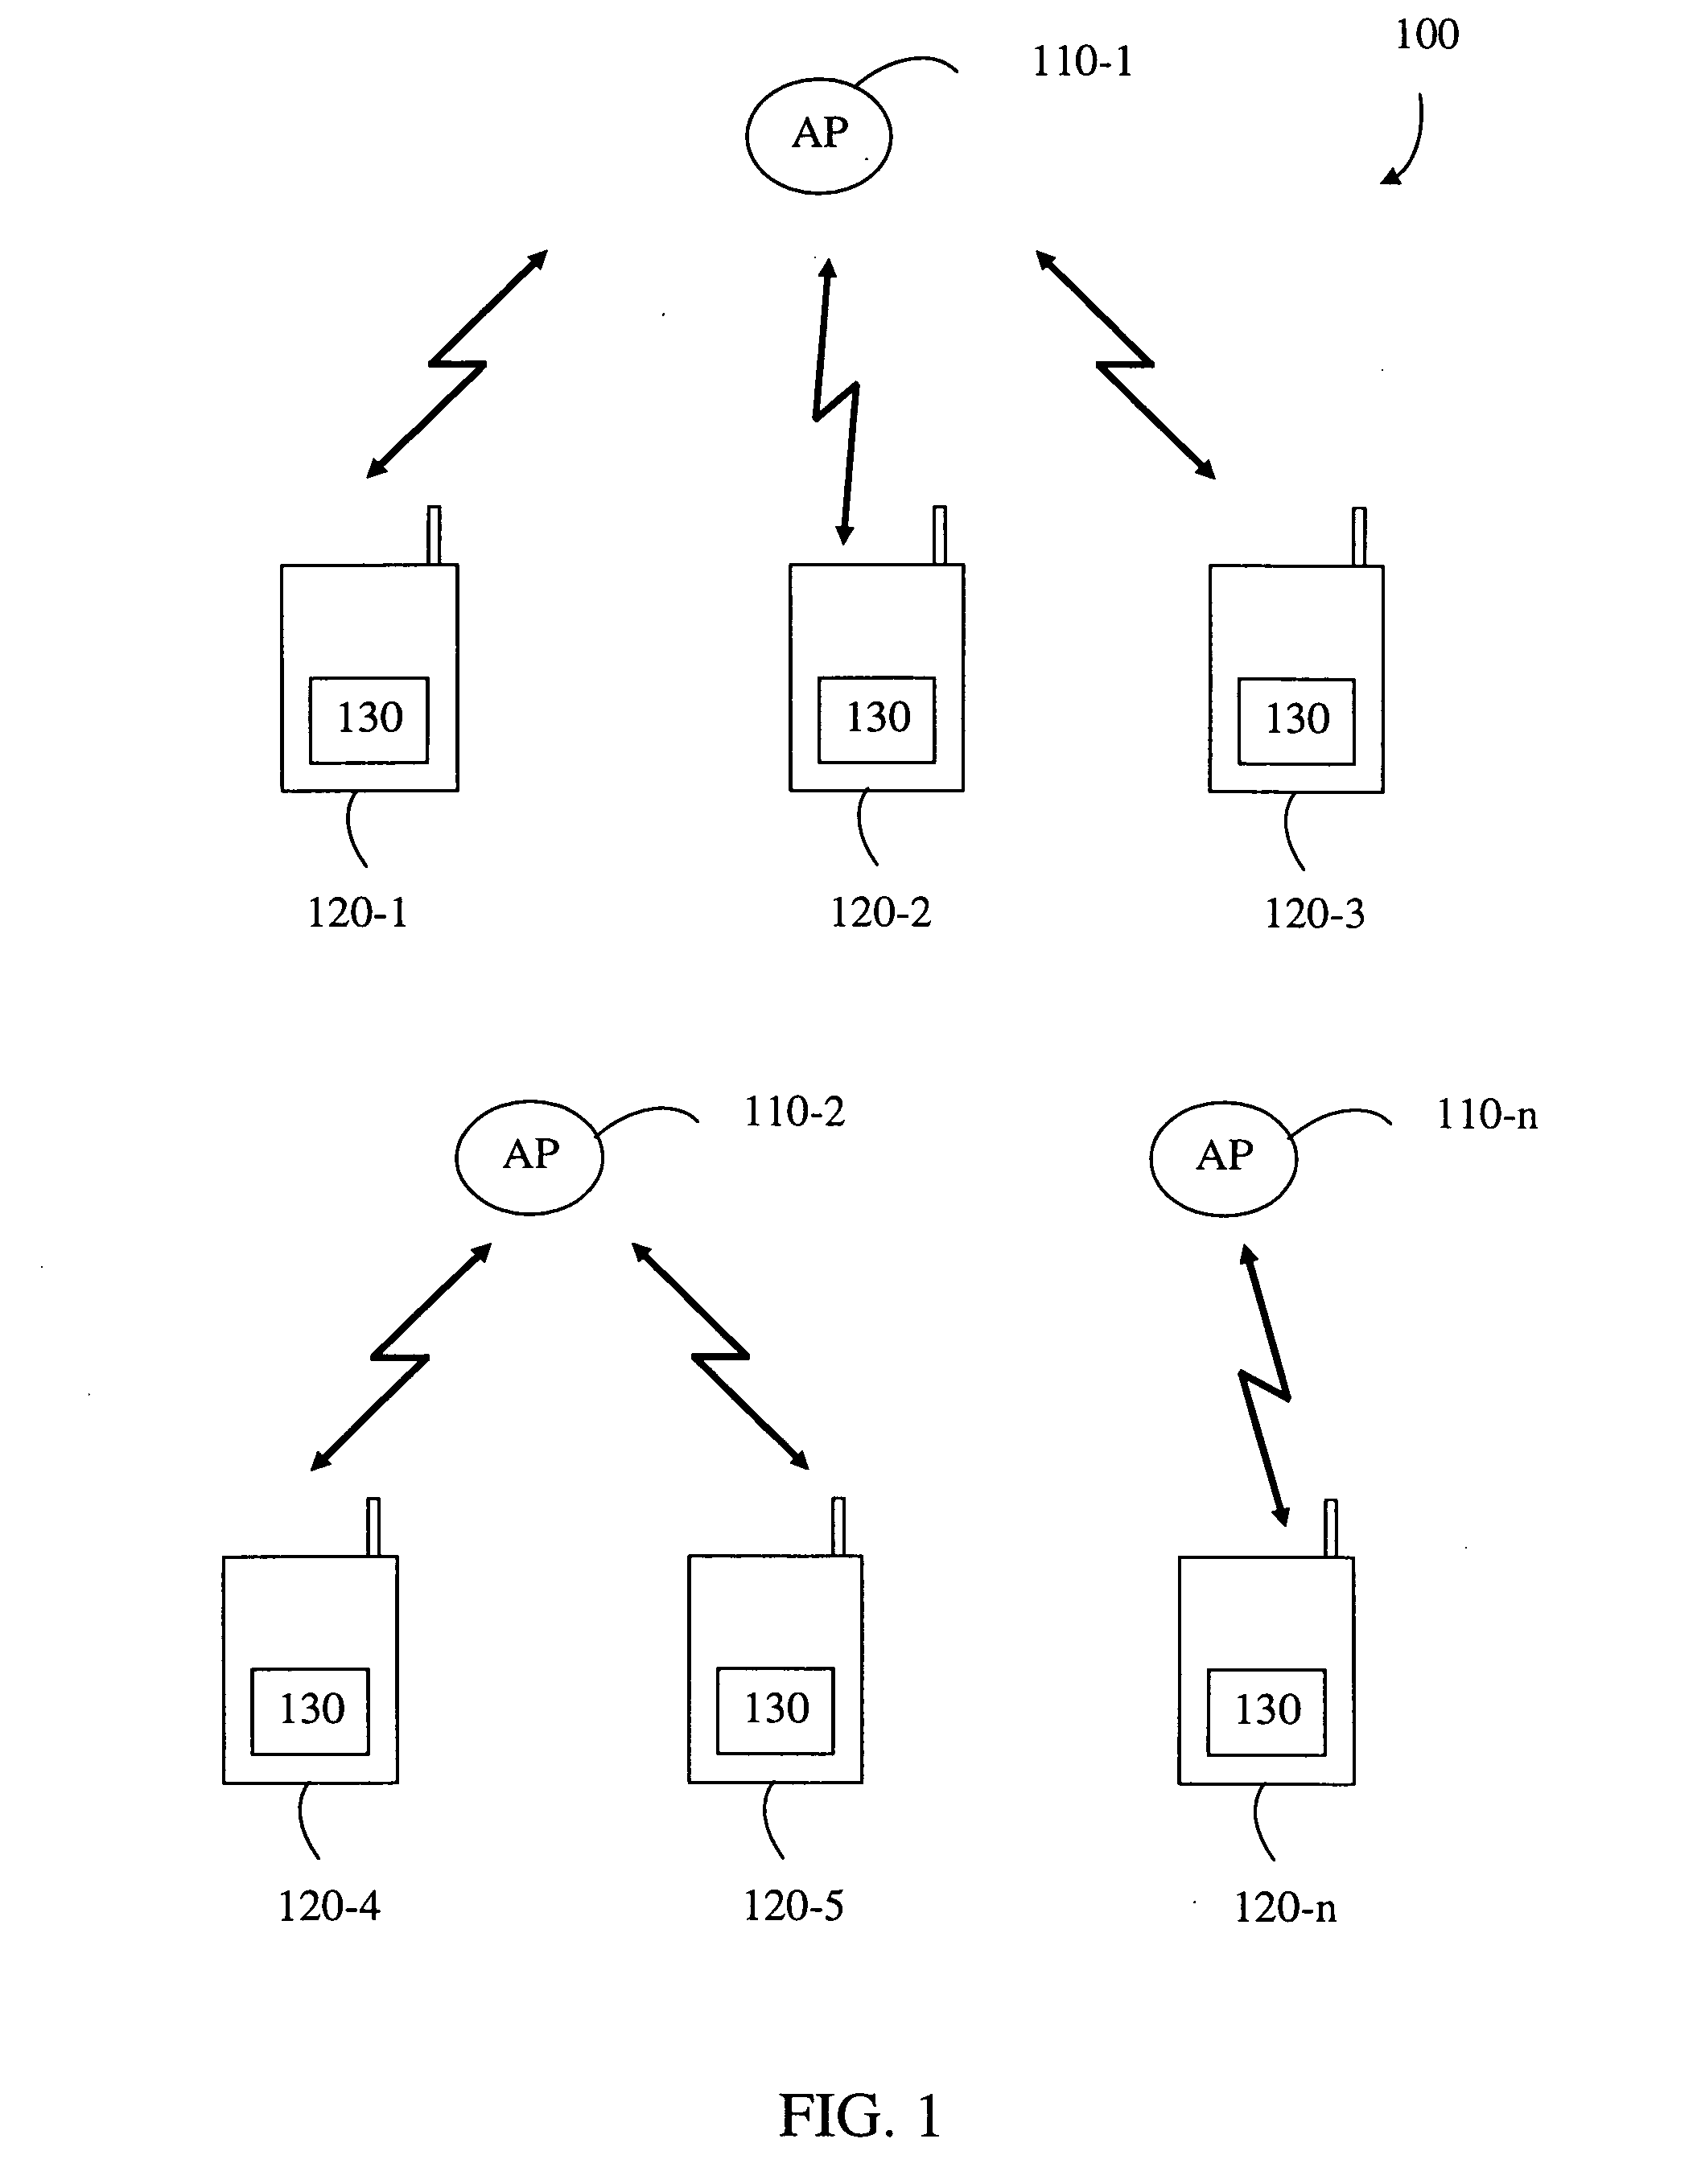 System and method of reducing interferences in wireless communication networks